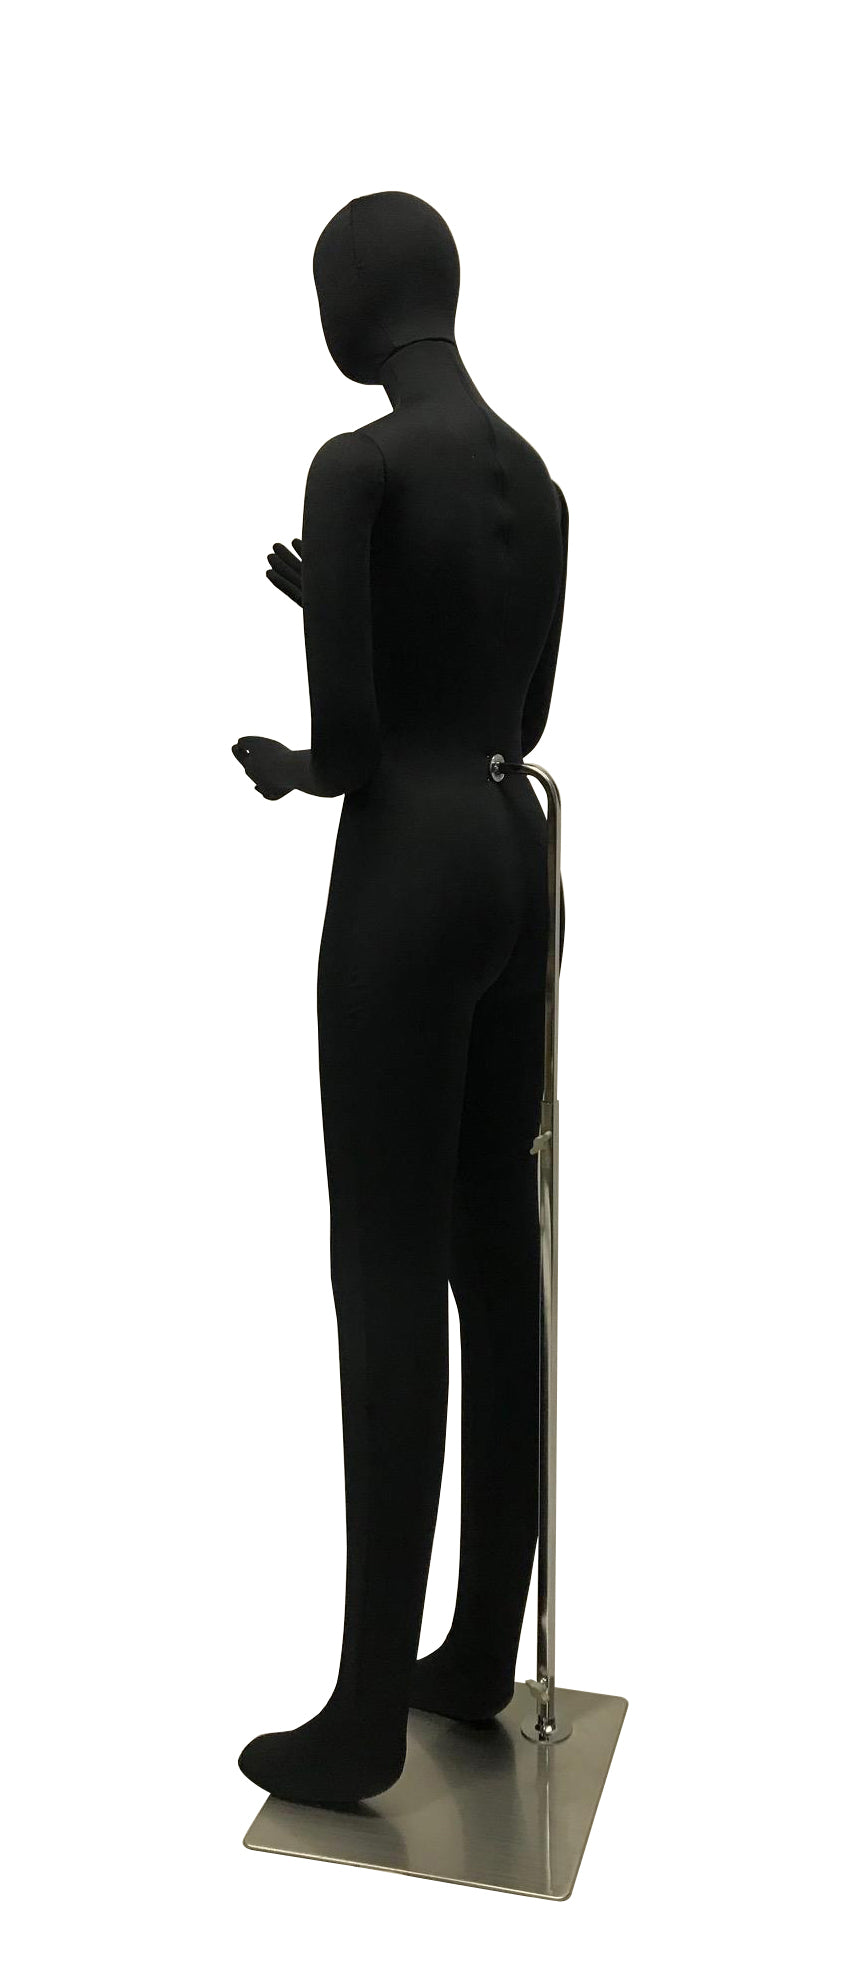 Black Cloth Egghead Female Mannequin: Bendable with Removable Head